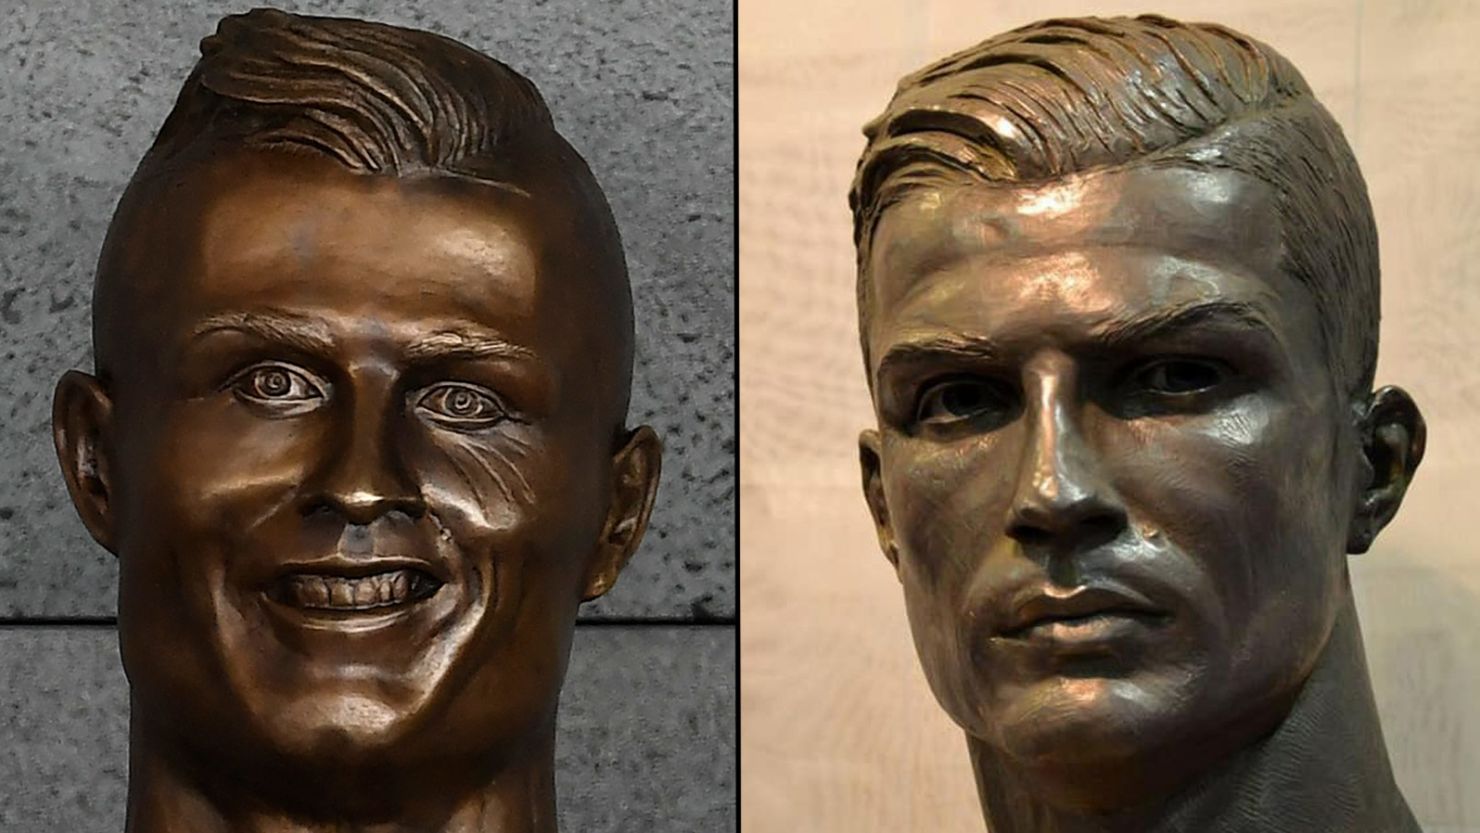 Which bust of Cristiano Ronaldo do you like better? The left is from March and the right was created in November.